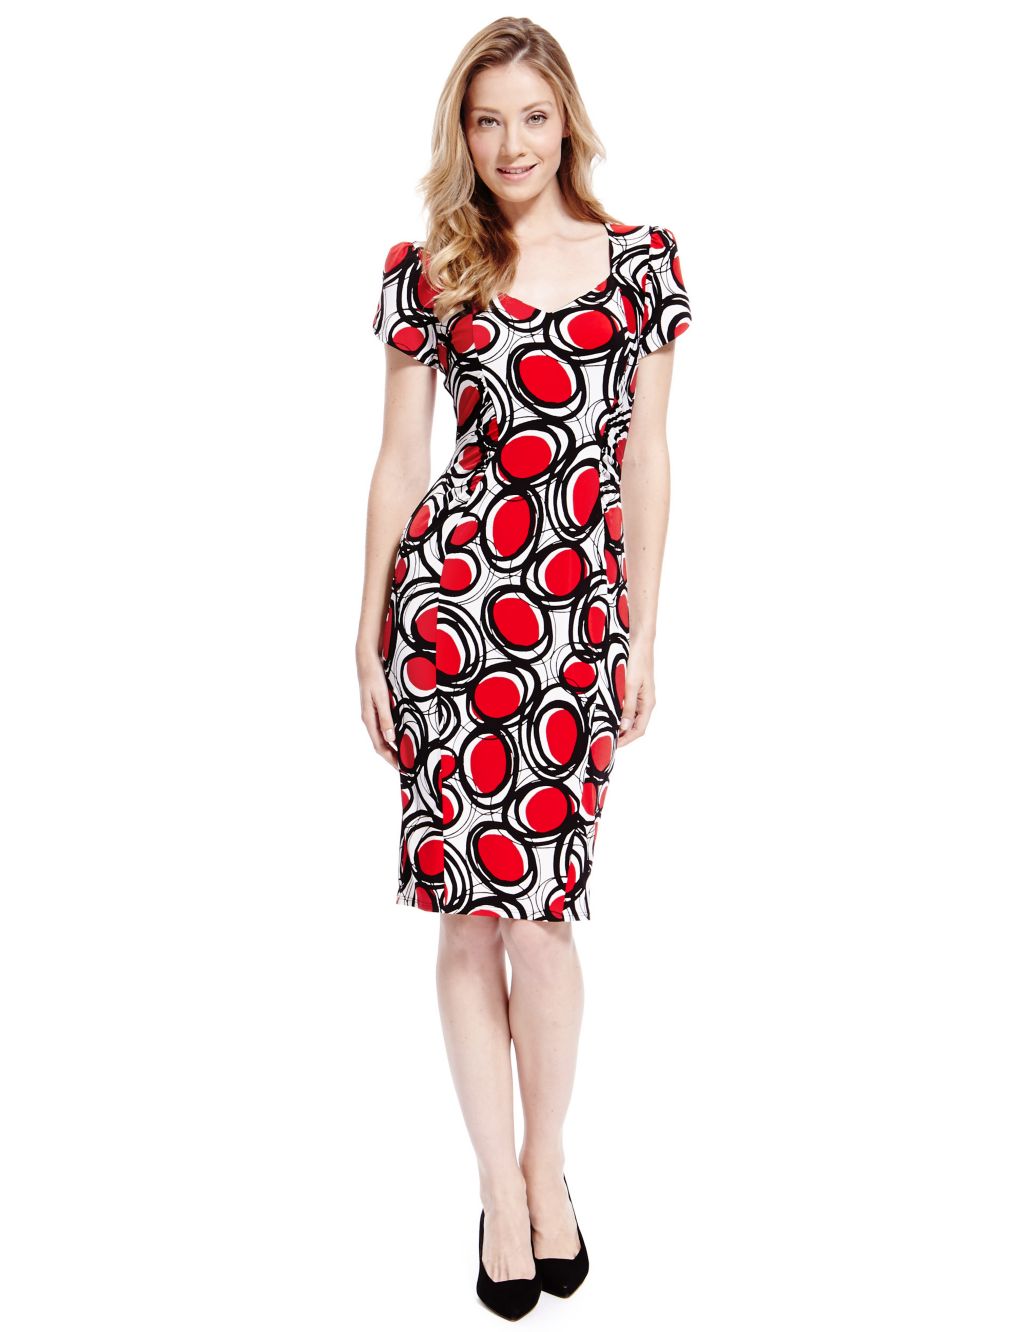 Drop A Dress Size Scratchy Spotted Shift Dress with Secret Support™ 2 of 4